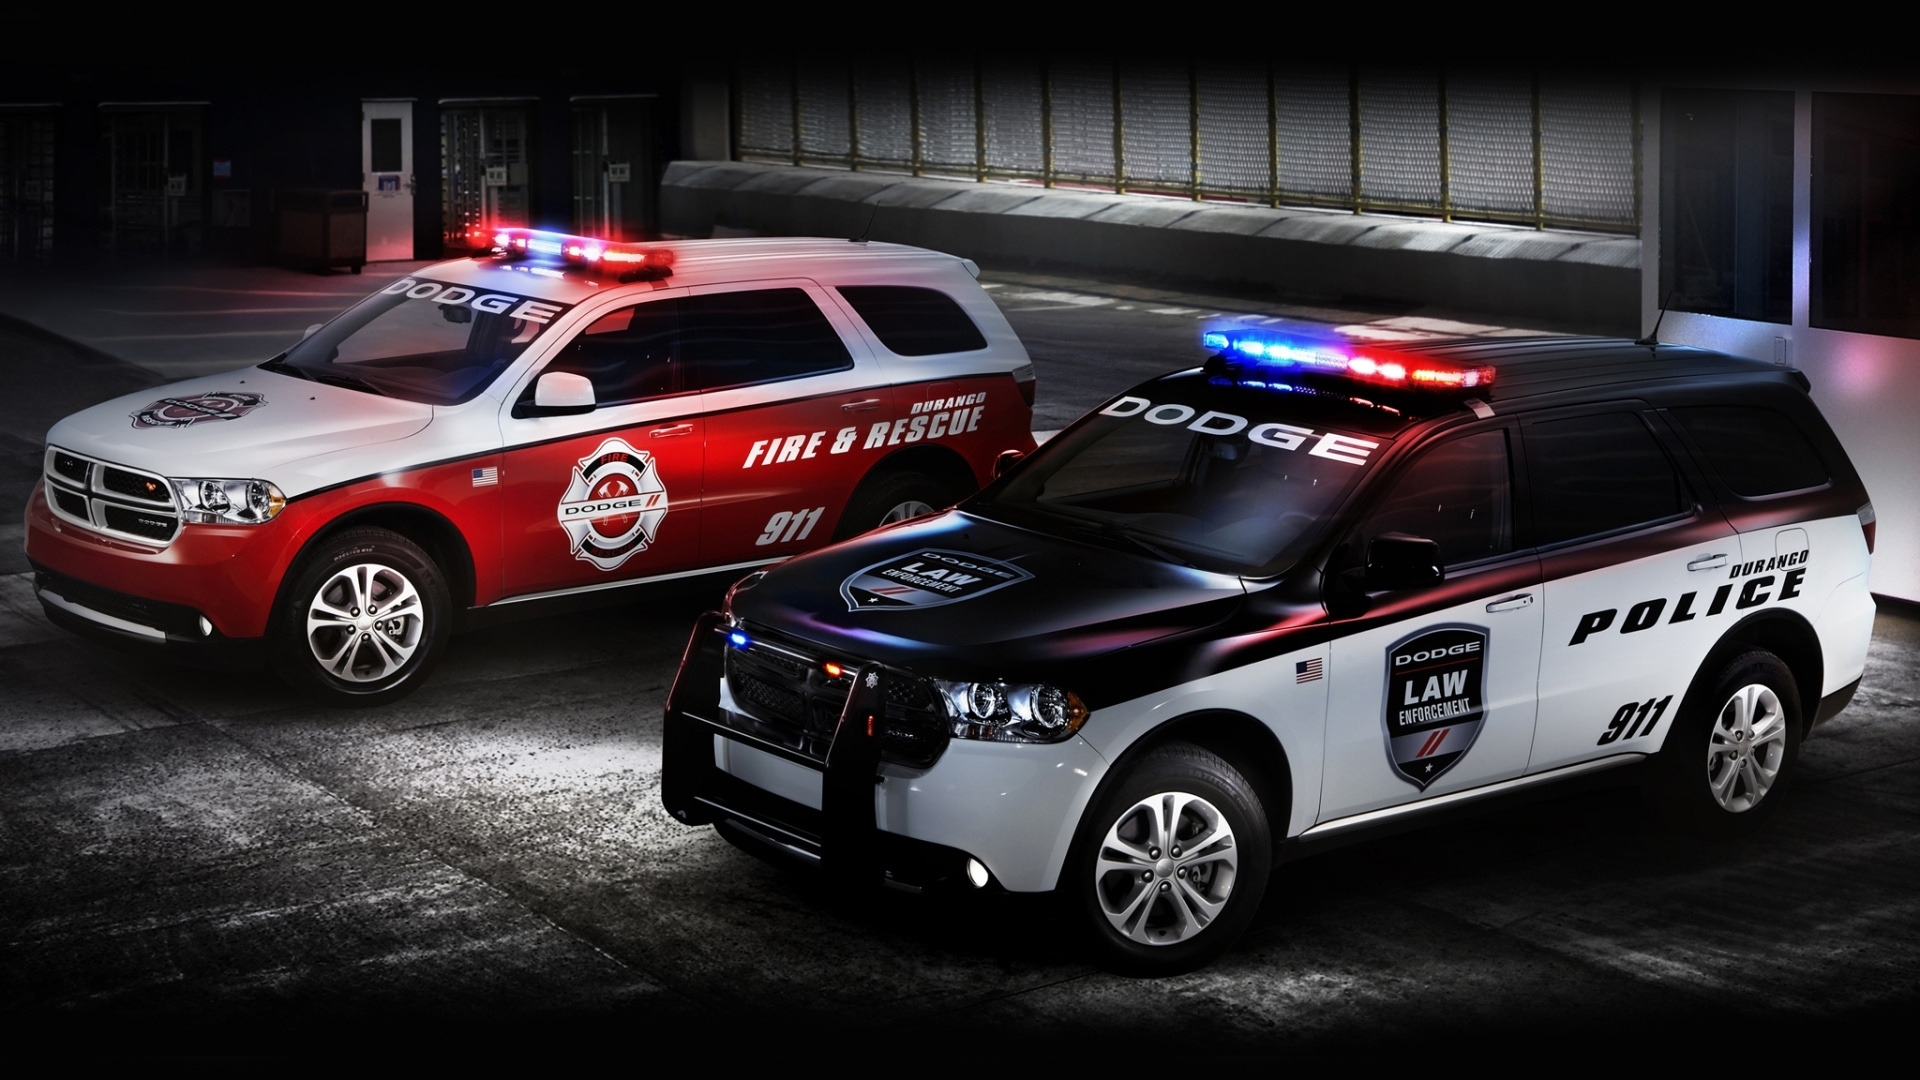 Dodge Police and Fire Cars for 1920 x 1080 HDTV 1080p resolution